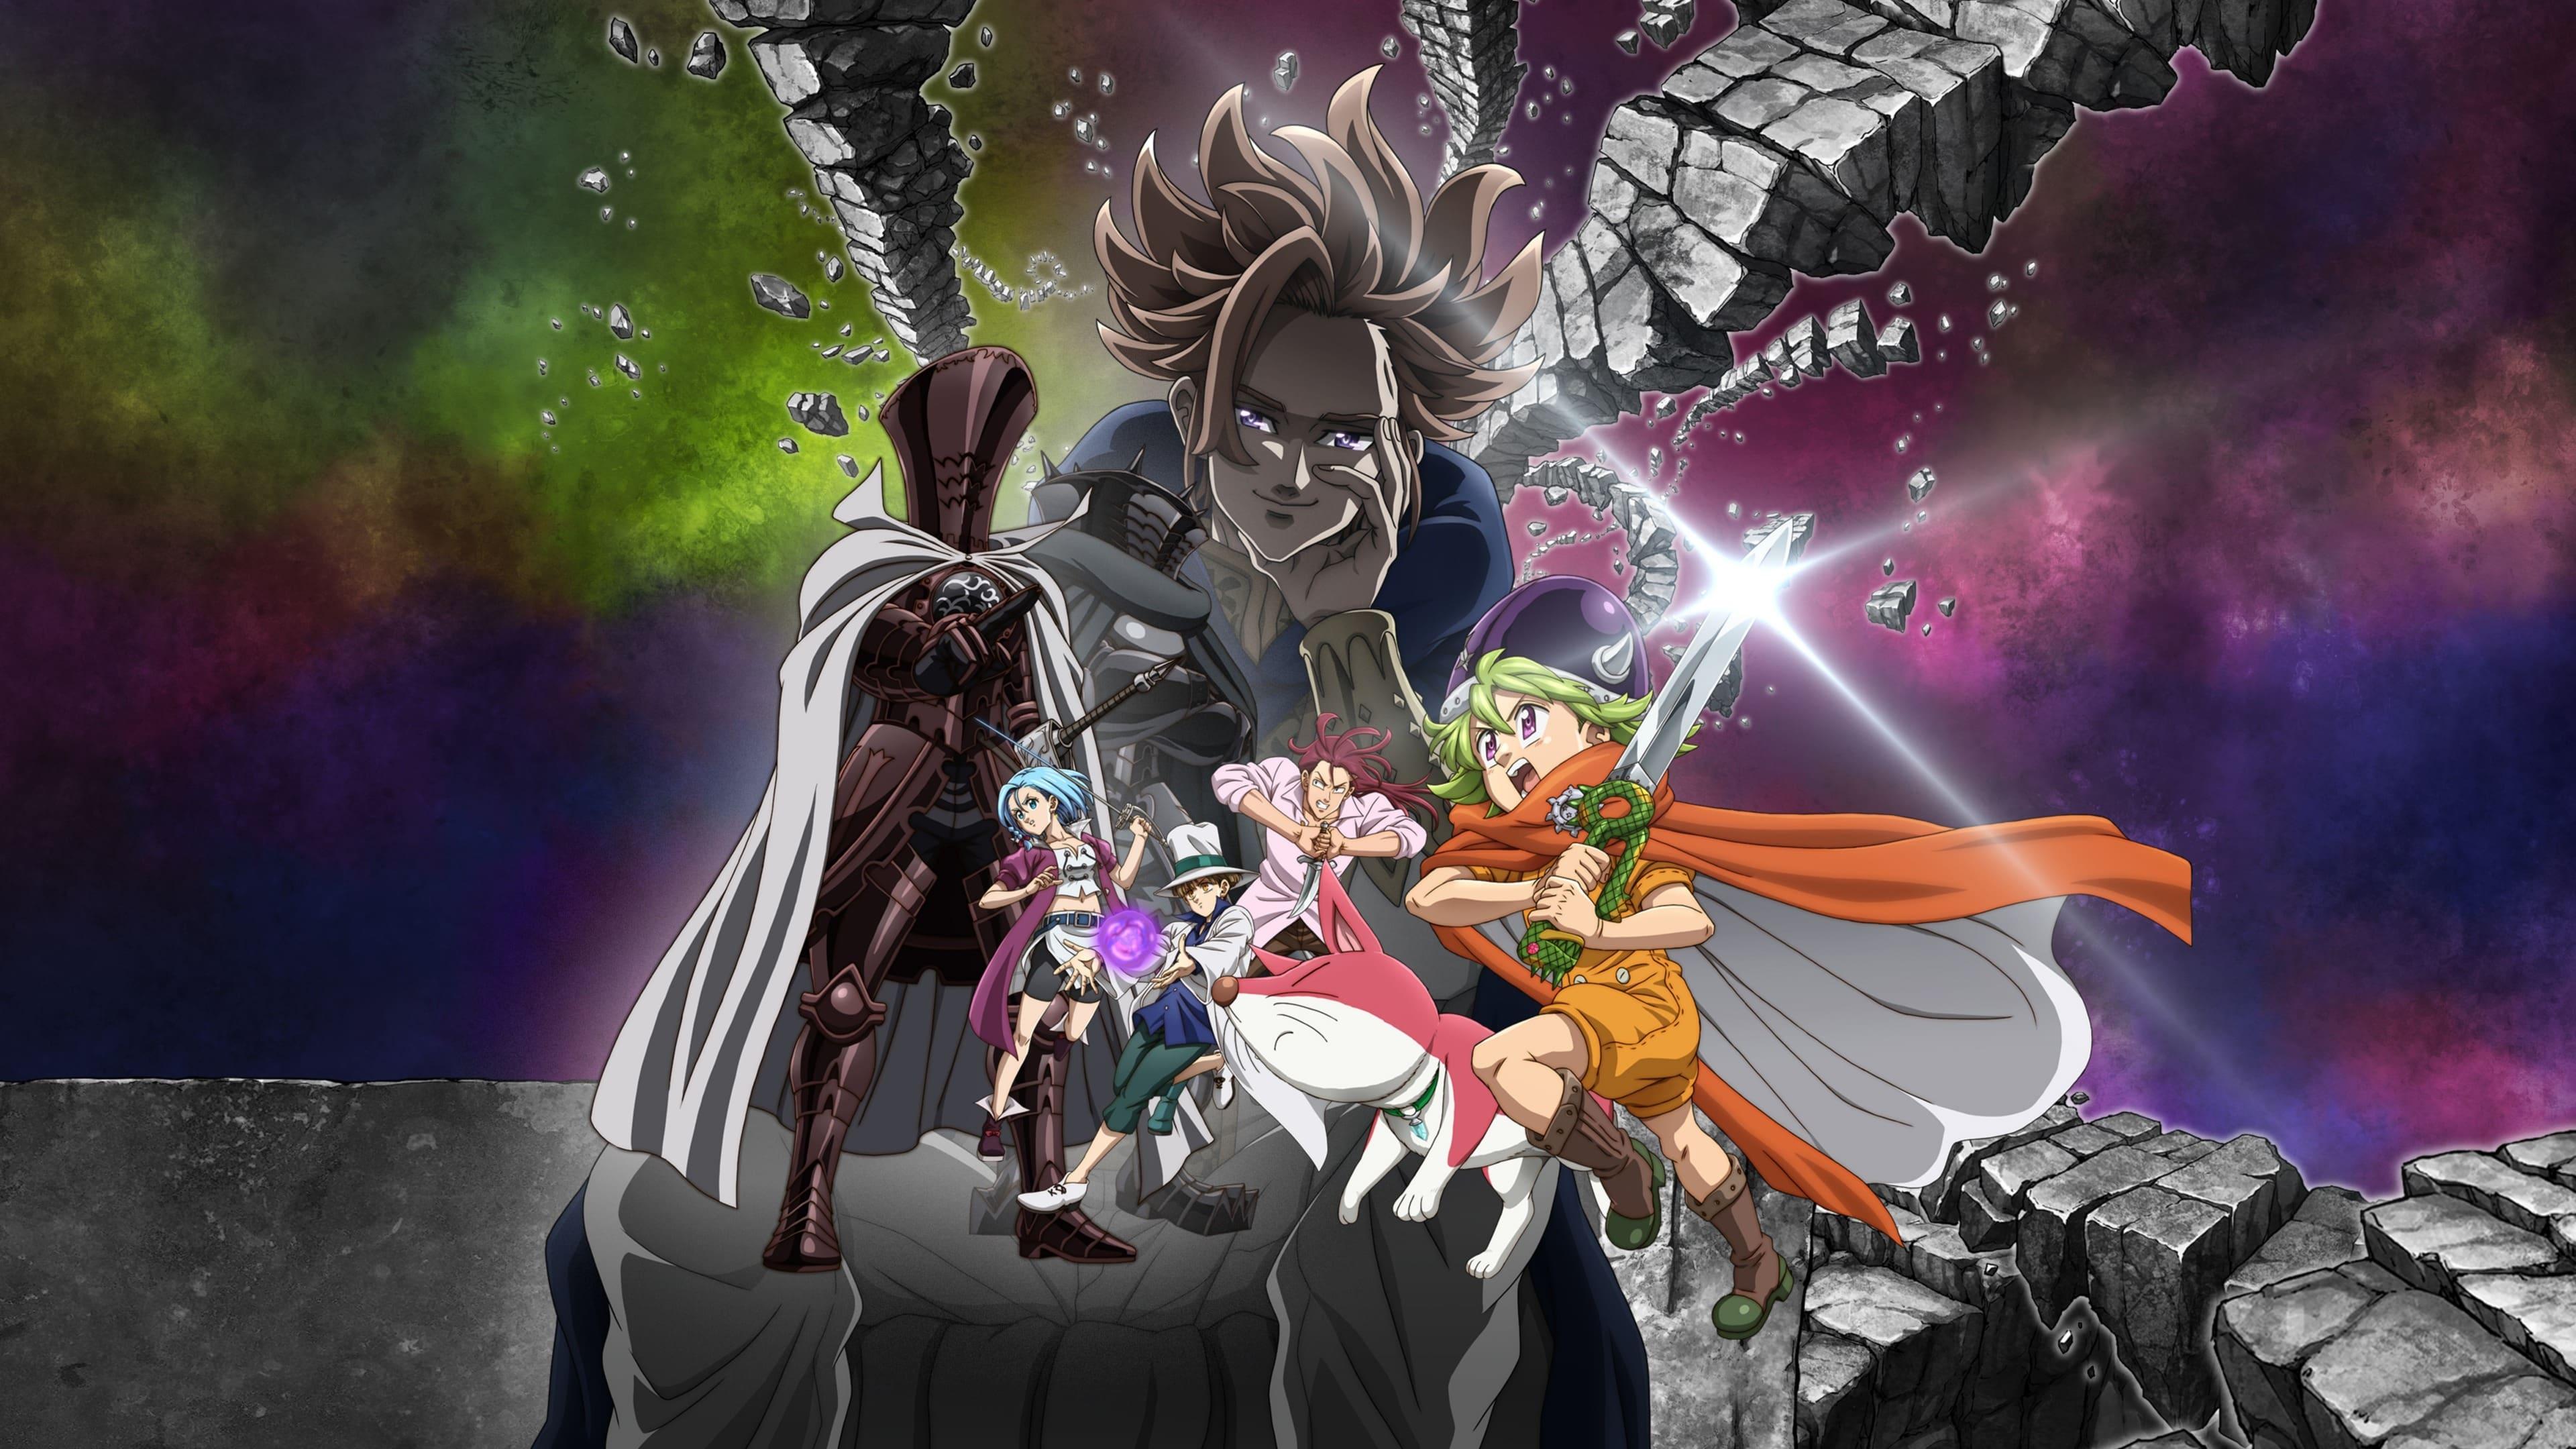 The Seven Deadly Sins: Four Knights of the Apocalypse backdrop